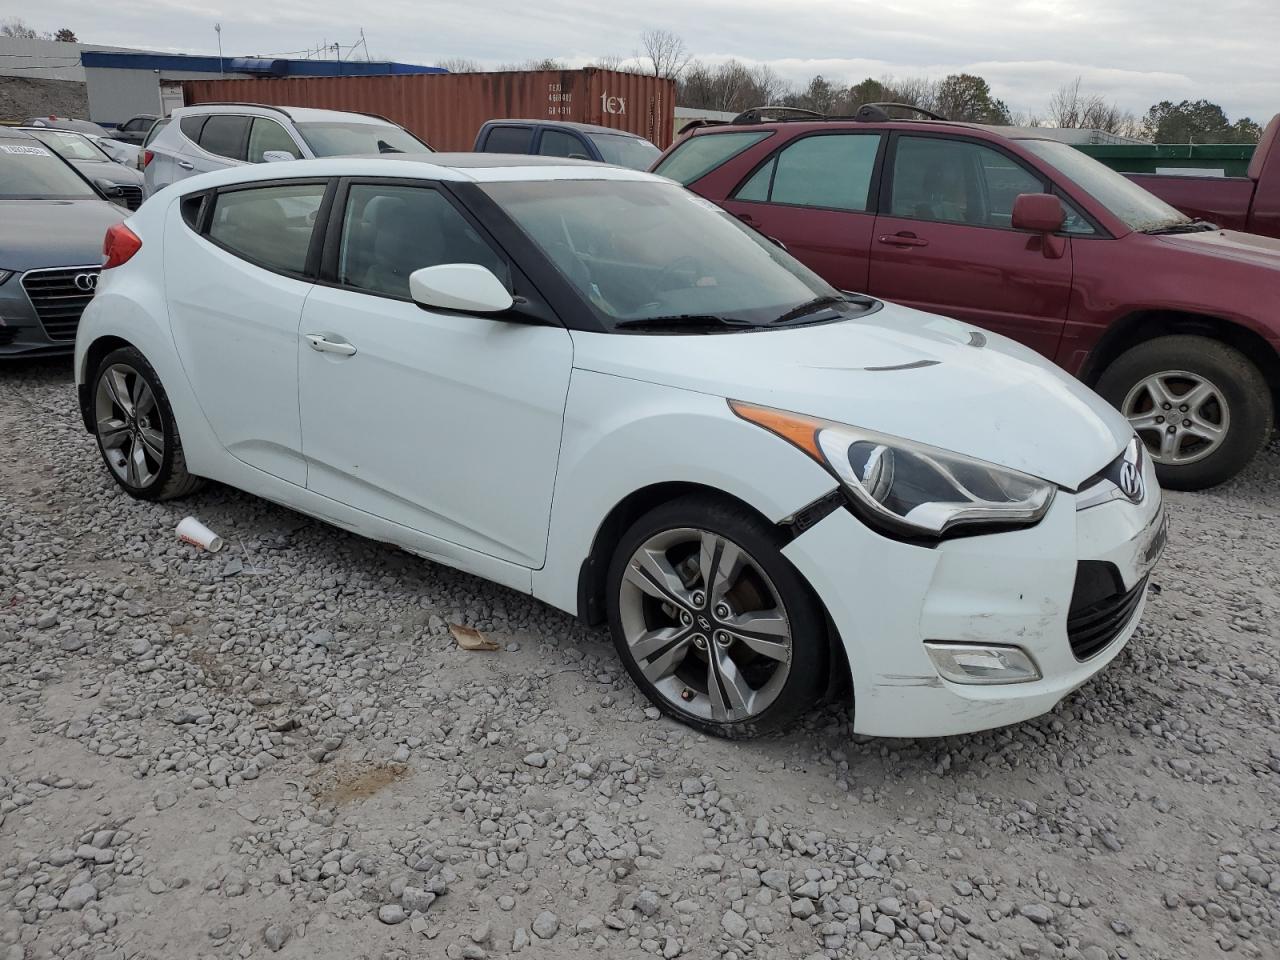 KMHTC6AD4CU****** Salvage and Wrecked 2012 Hyundai Veloster in Alabama State